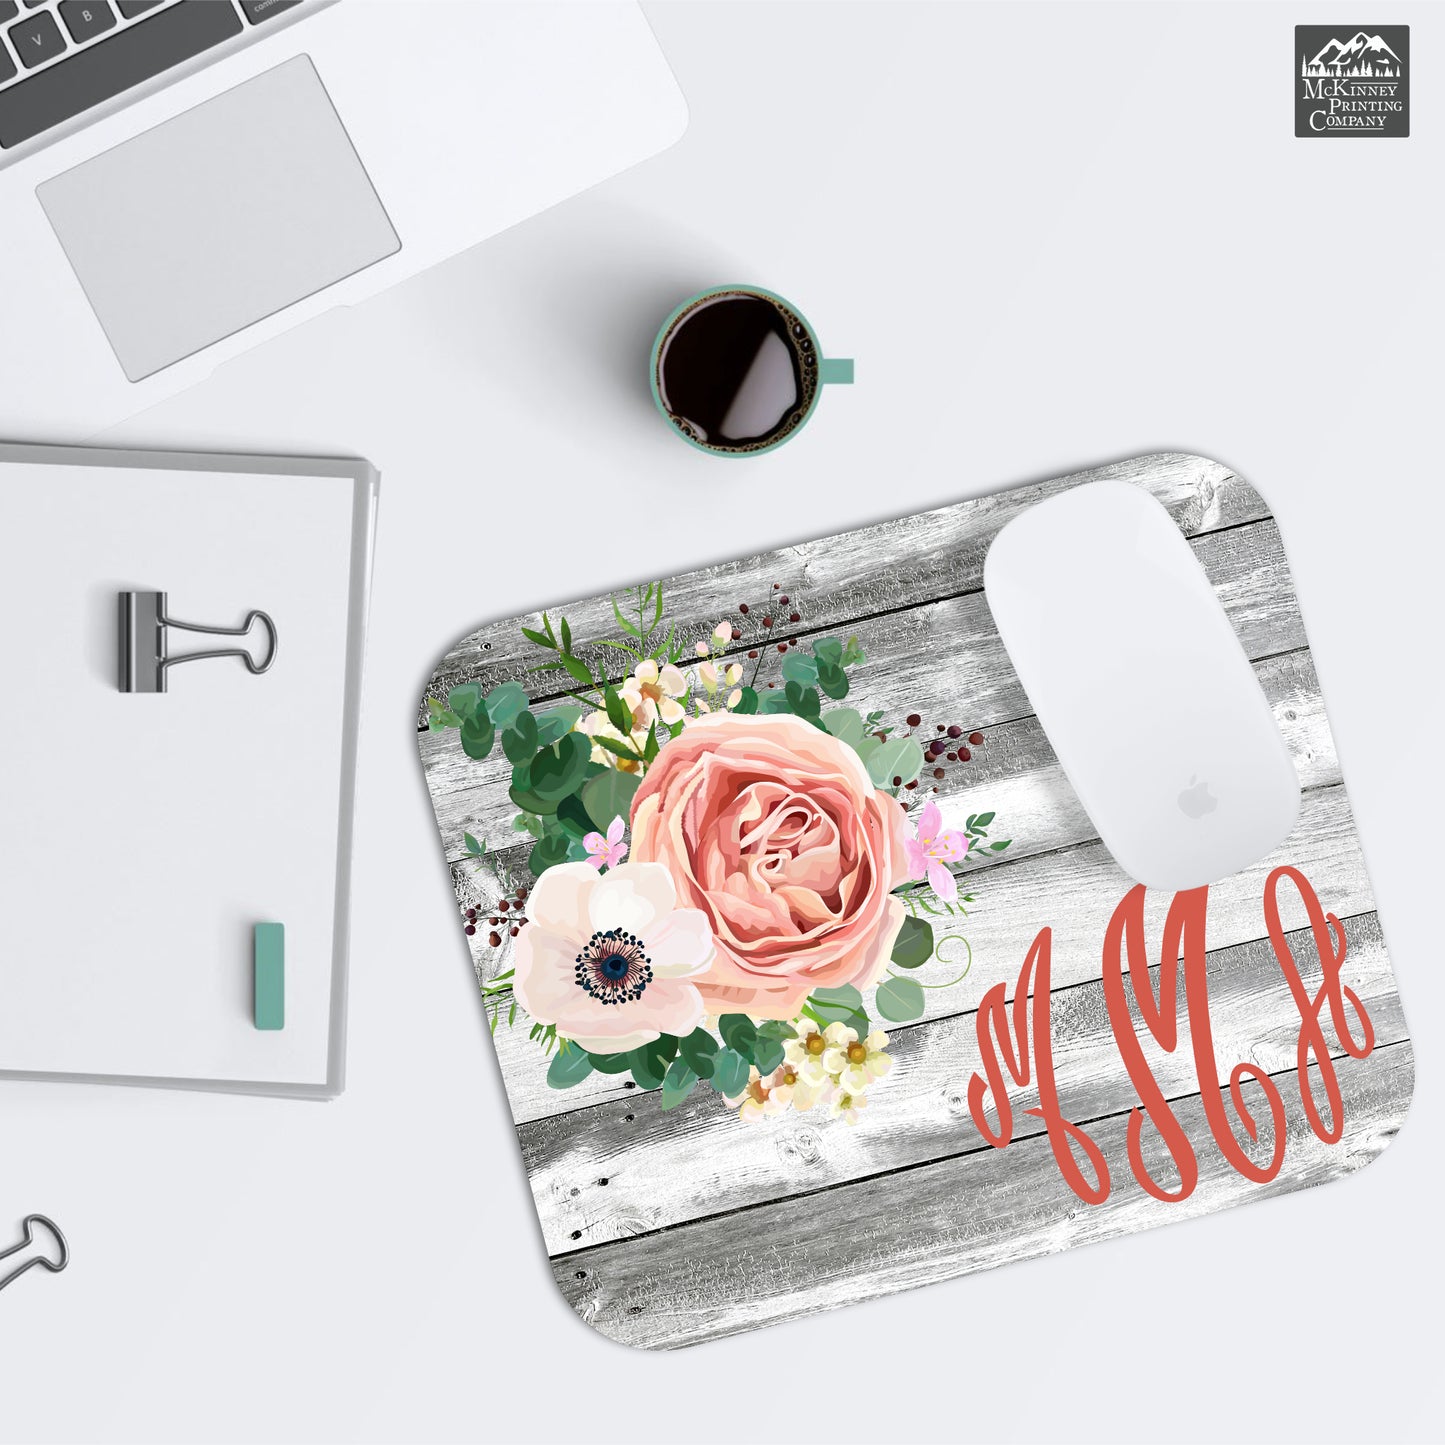 Personalized Mouse Pad, Custom, Name, Monogram, Personalised, Laptop, Computer, Accessories